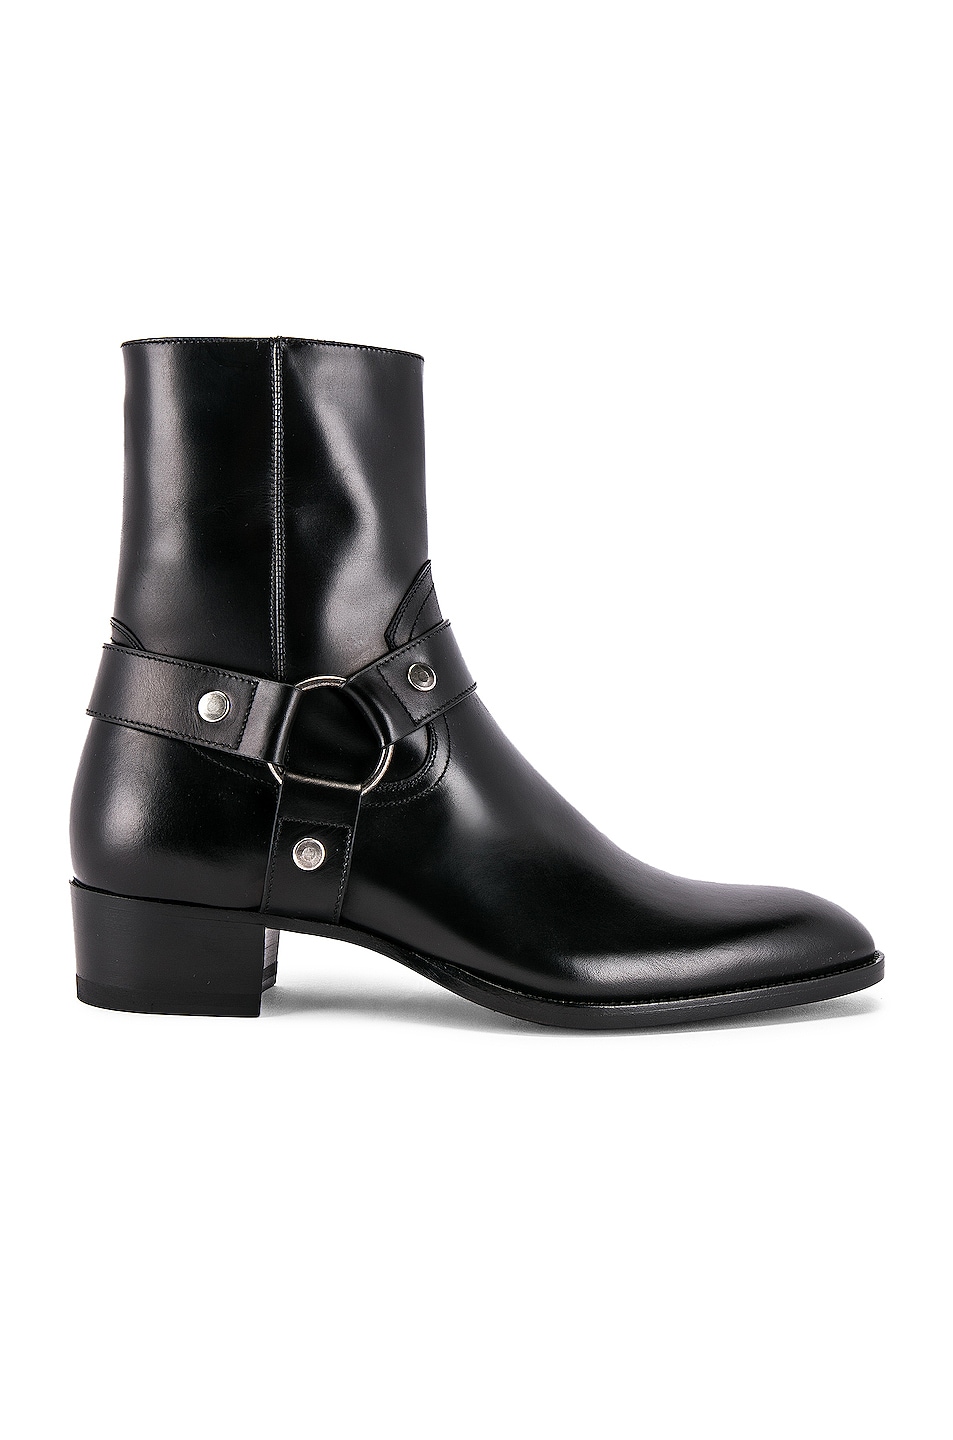 Image 1 of Saint Laurent Wyatt Leather Harness Boots in Black